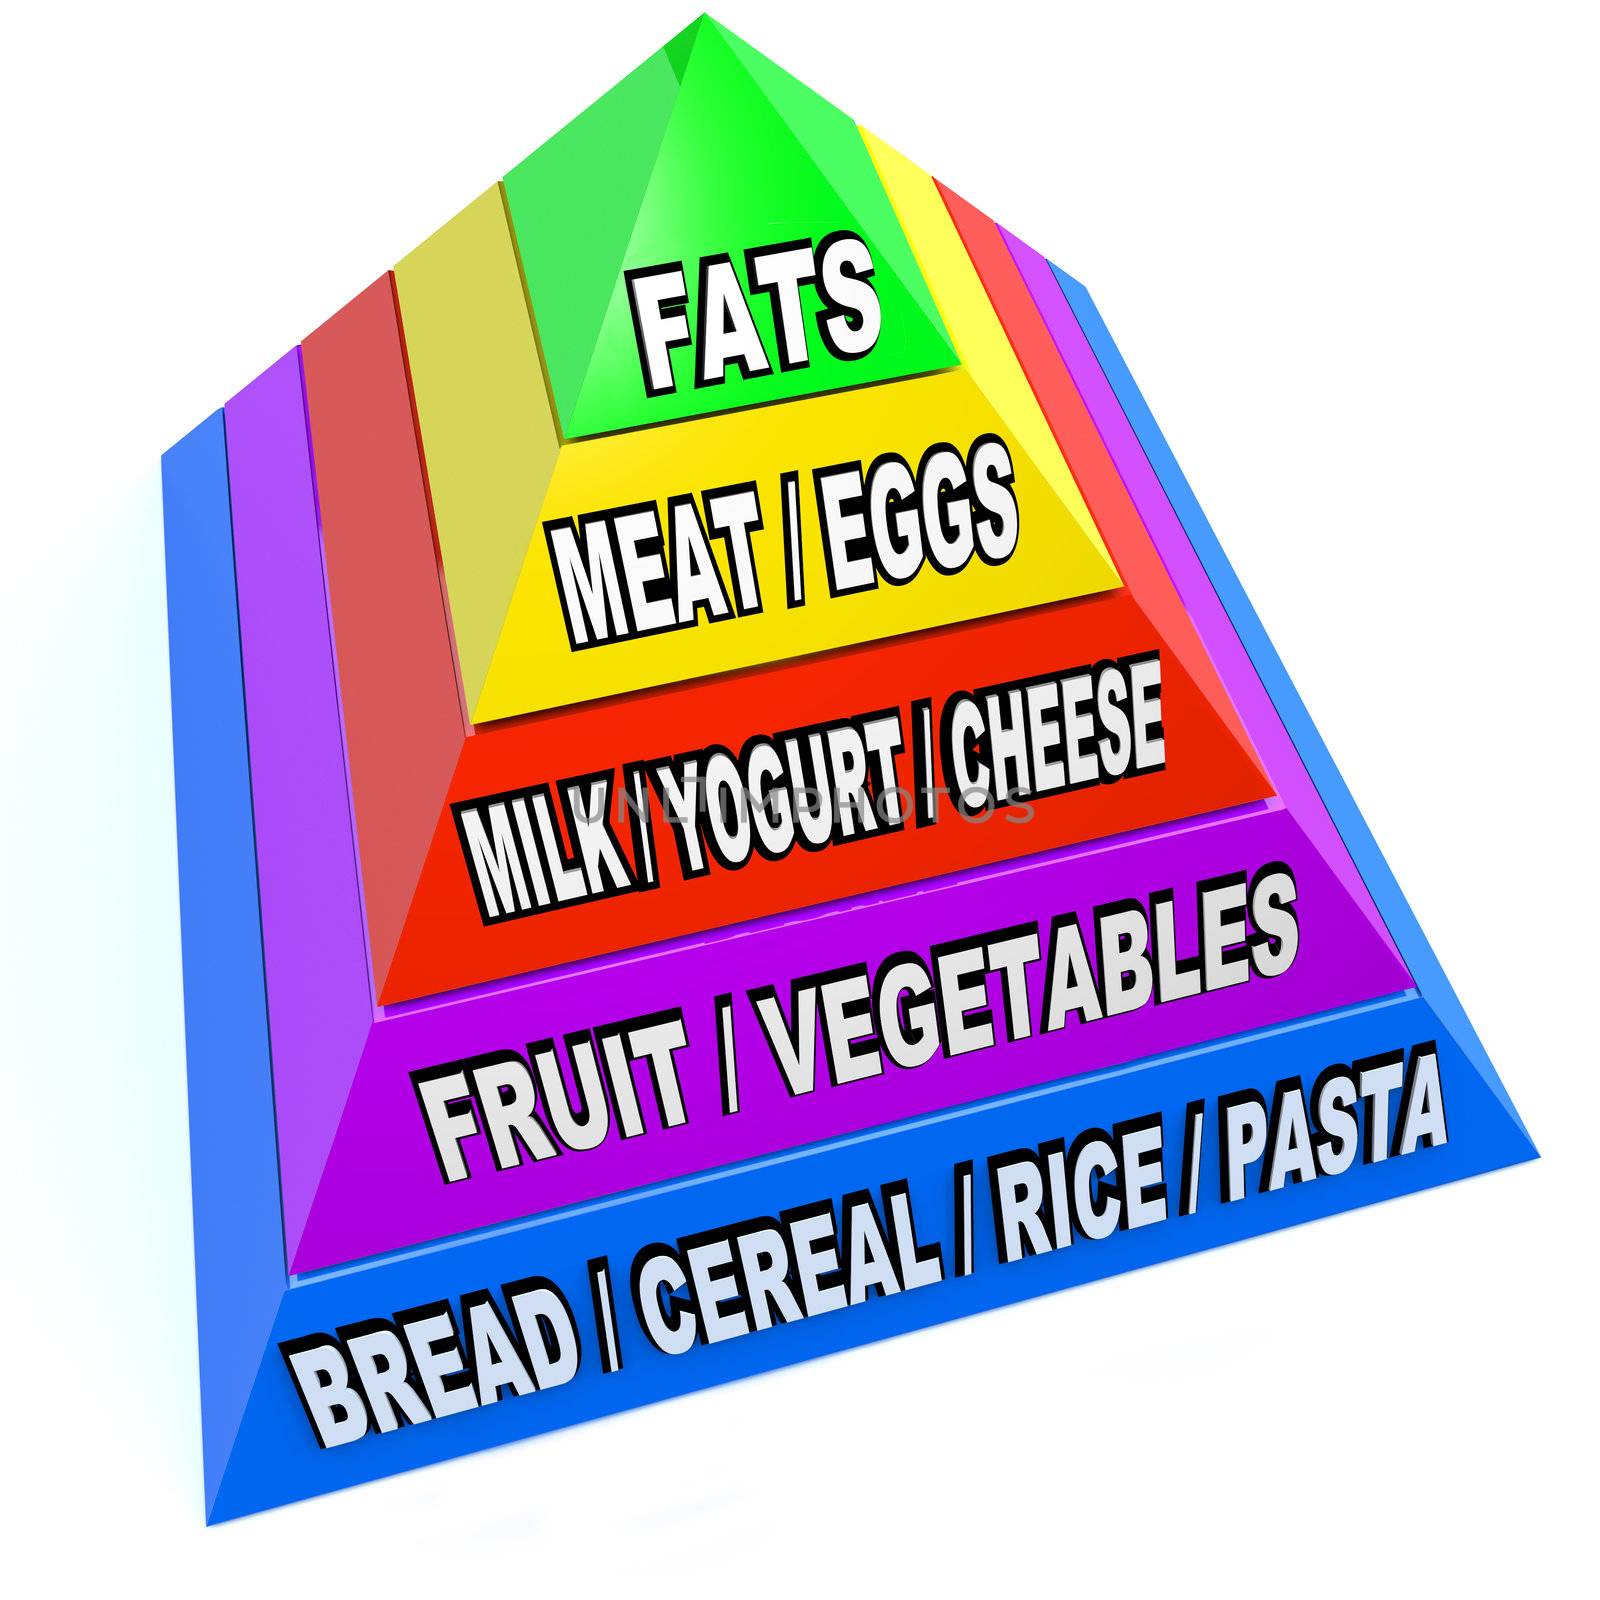 A pyramid illustrating the size and proportions of recommended servings of various types of food we all need to remain healthy and strong